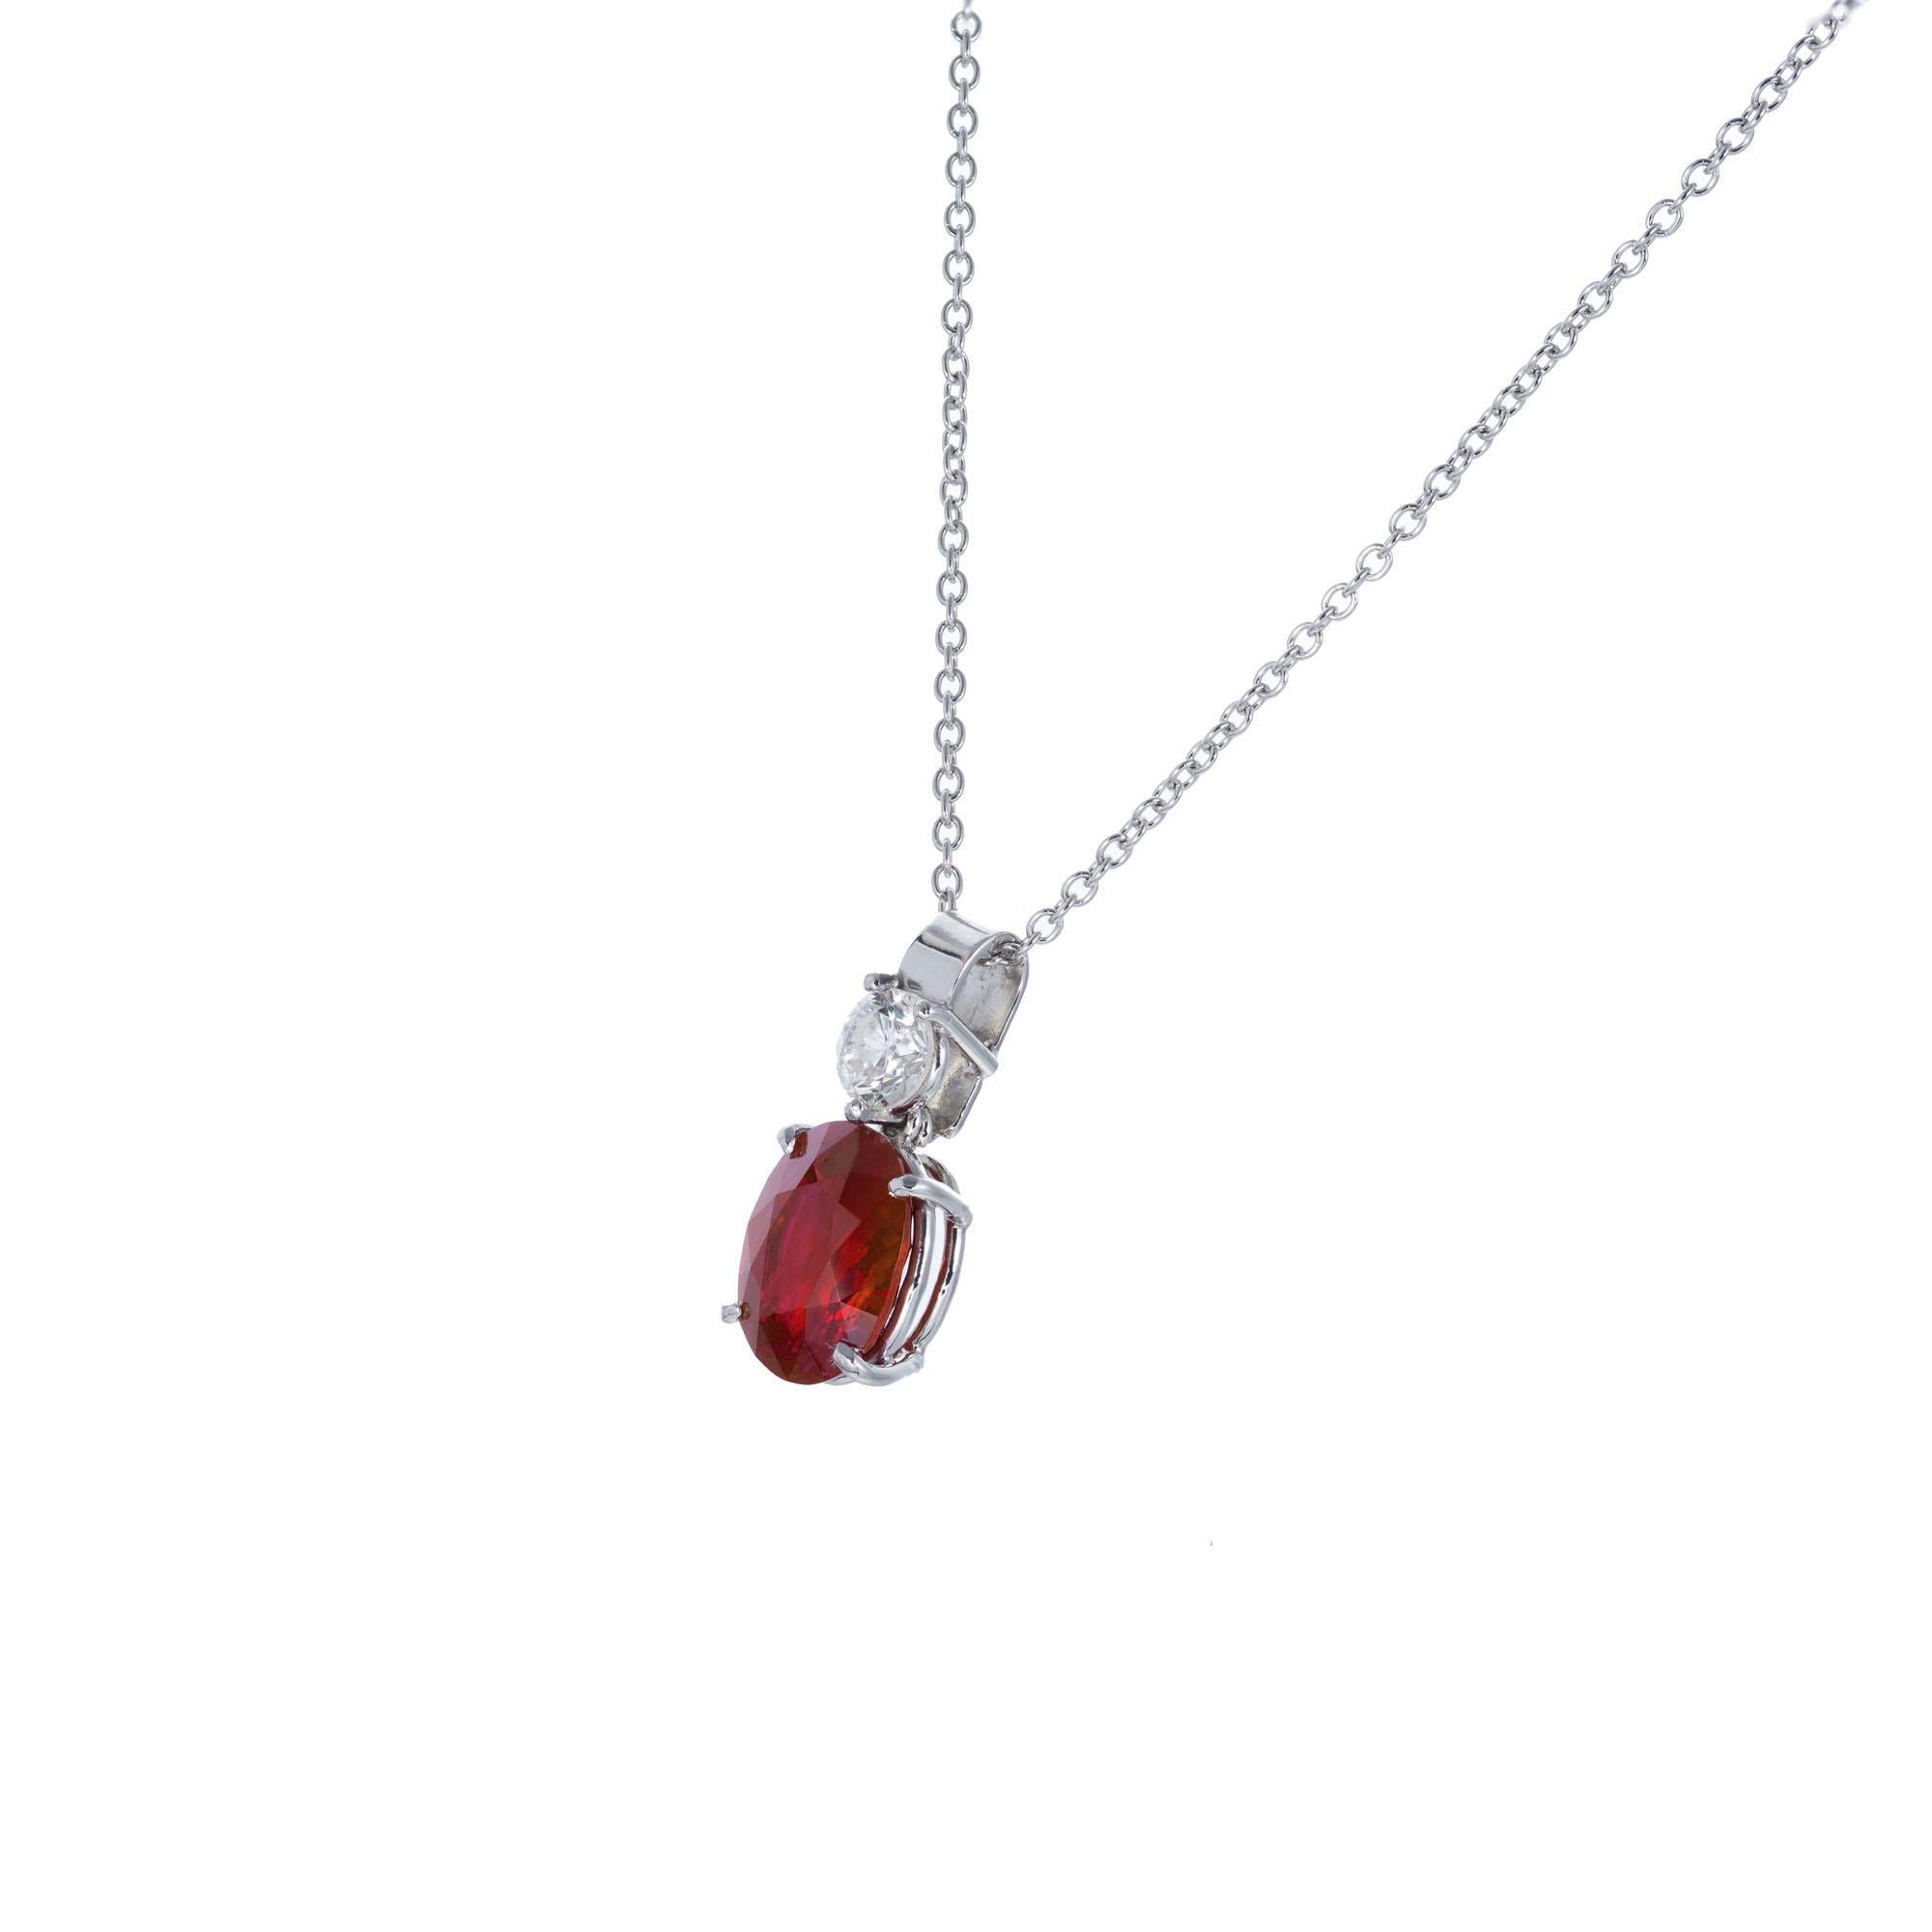 GIA Certified oval 2.21 carat ruby in a simple custom made platinum pendant setting with a round diamond accent. Created in the Peter Suchy Workshop.  

1 oval red ruby SI, approx. 2.21ct GIA Certificate #1196068191
1 round brilliant cut diamond I